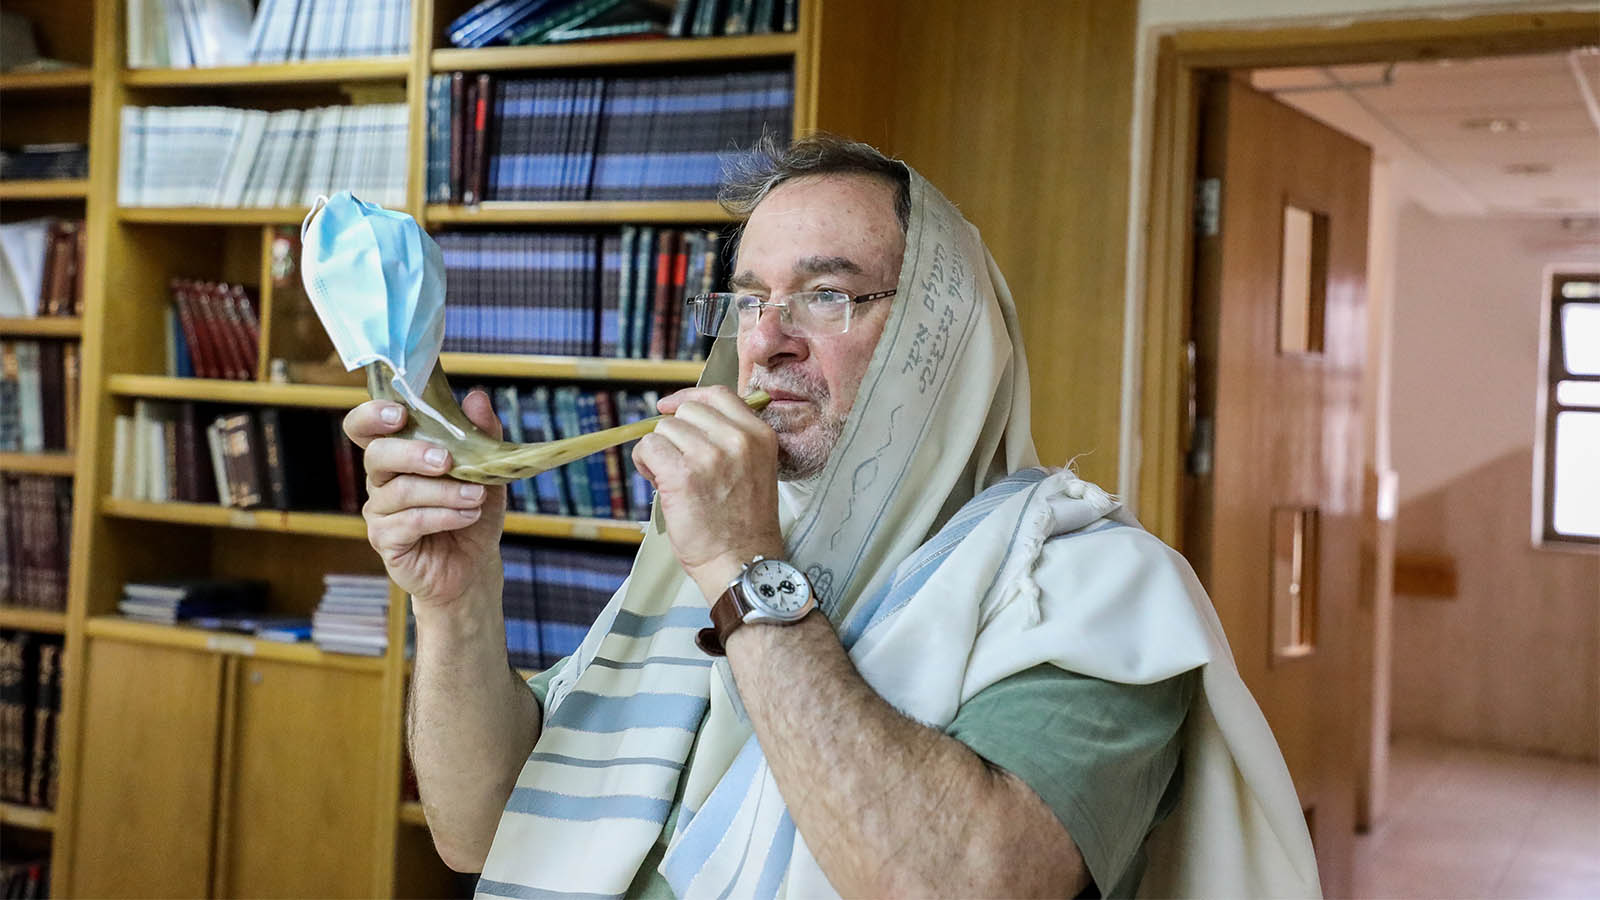 Man blowing the shofar while adhering to regulations set by Ministry of Health (Photo: Gershon Elison/Flash 90)